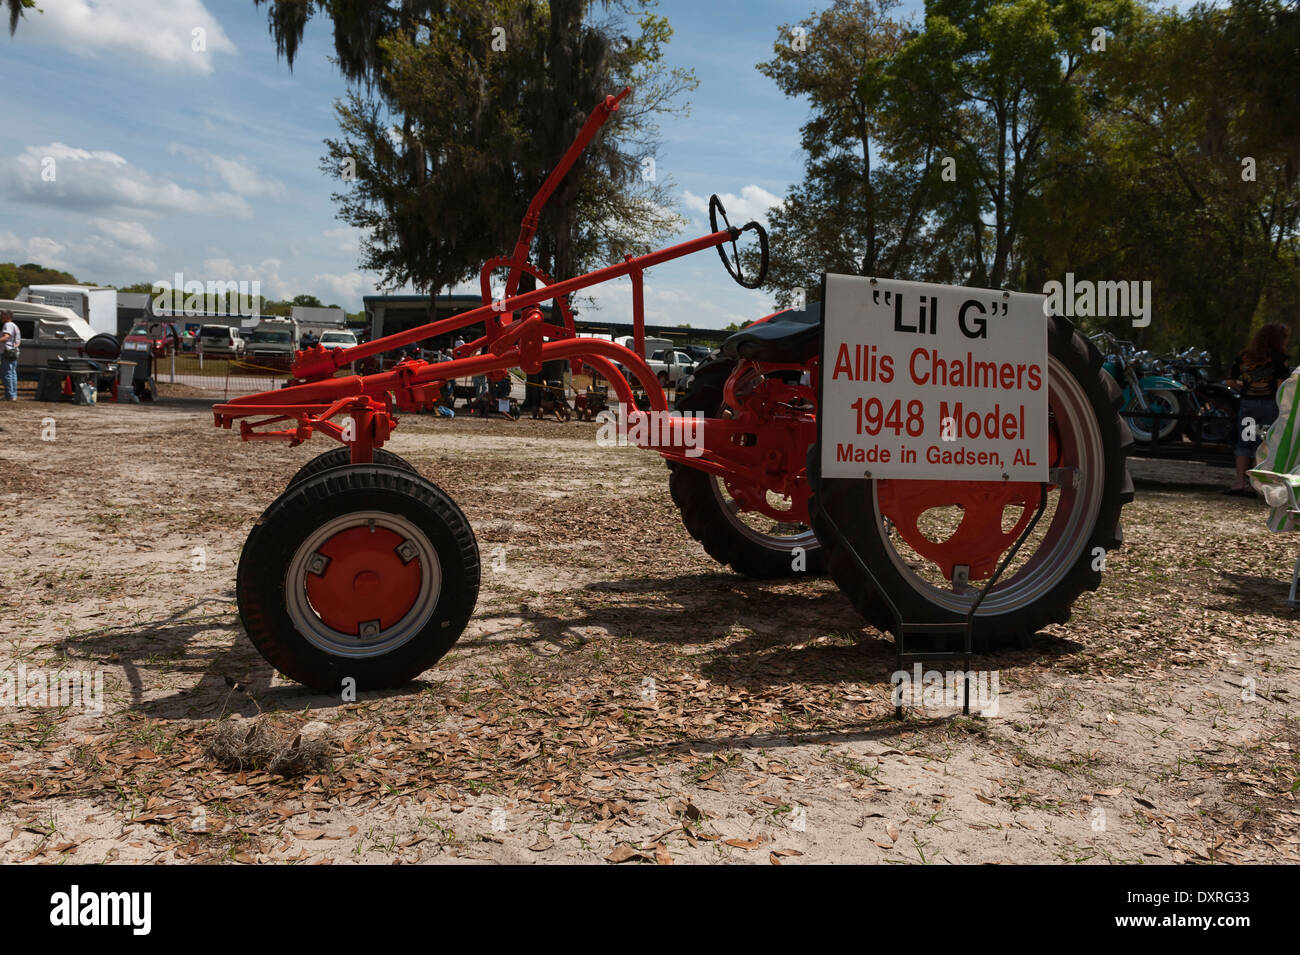 Restored 1966 AC Allis Chalmers Series IV D17 tractor for sale